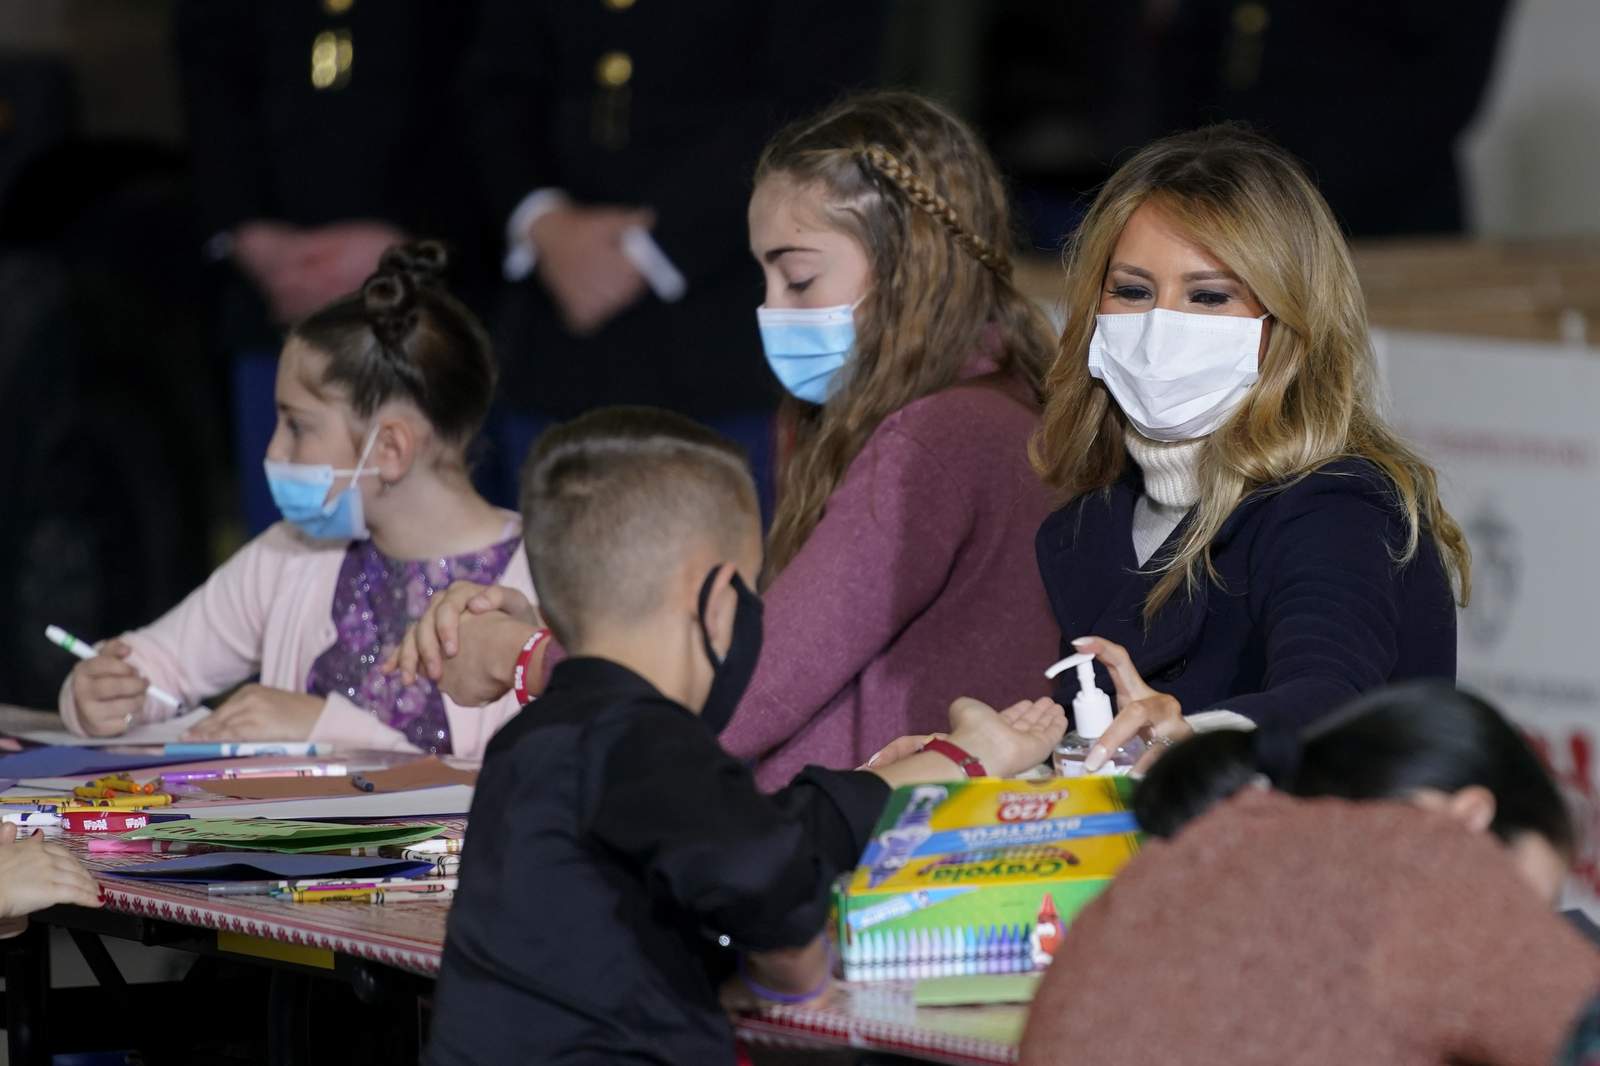 First lady urges kindness during holiday clouded by pandemic